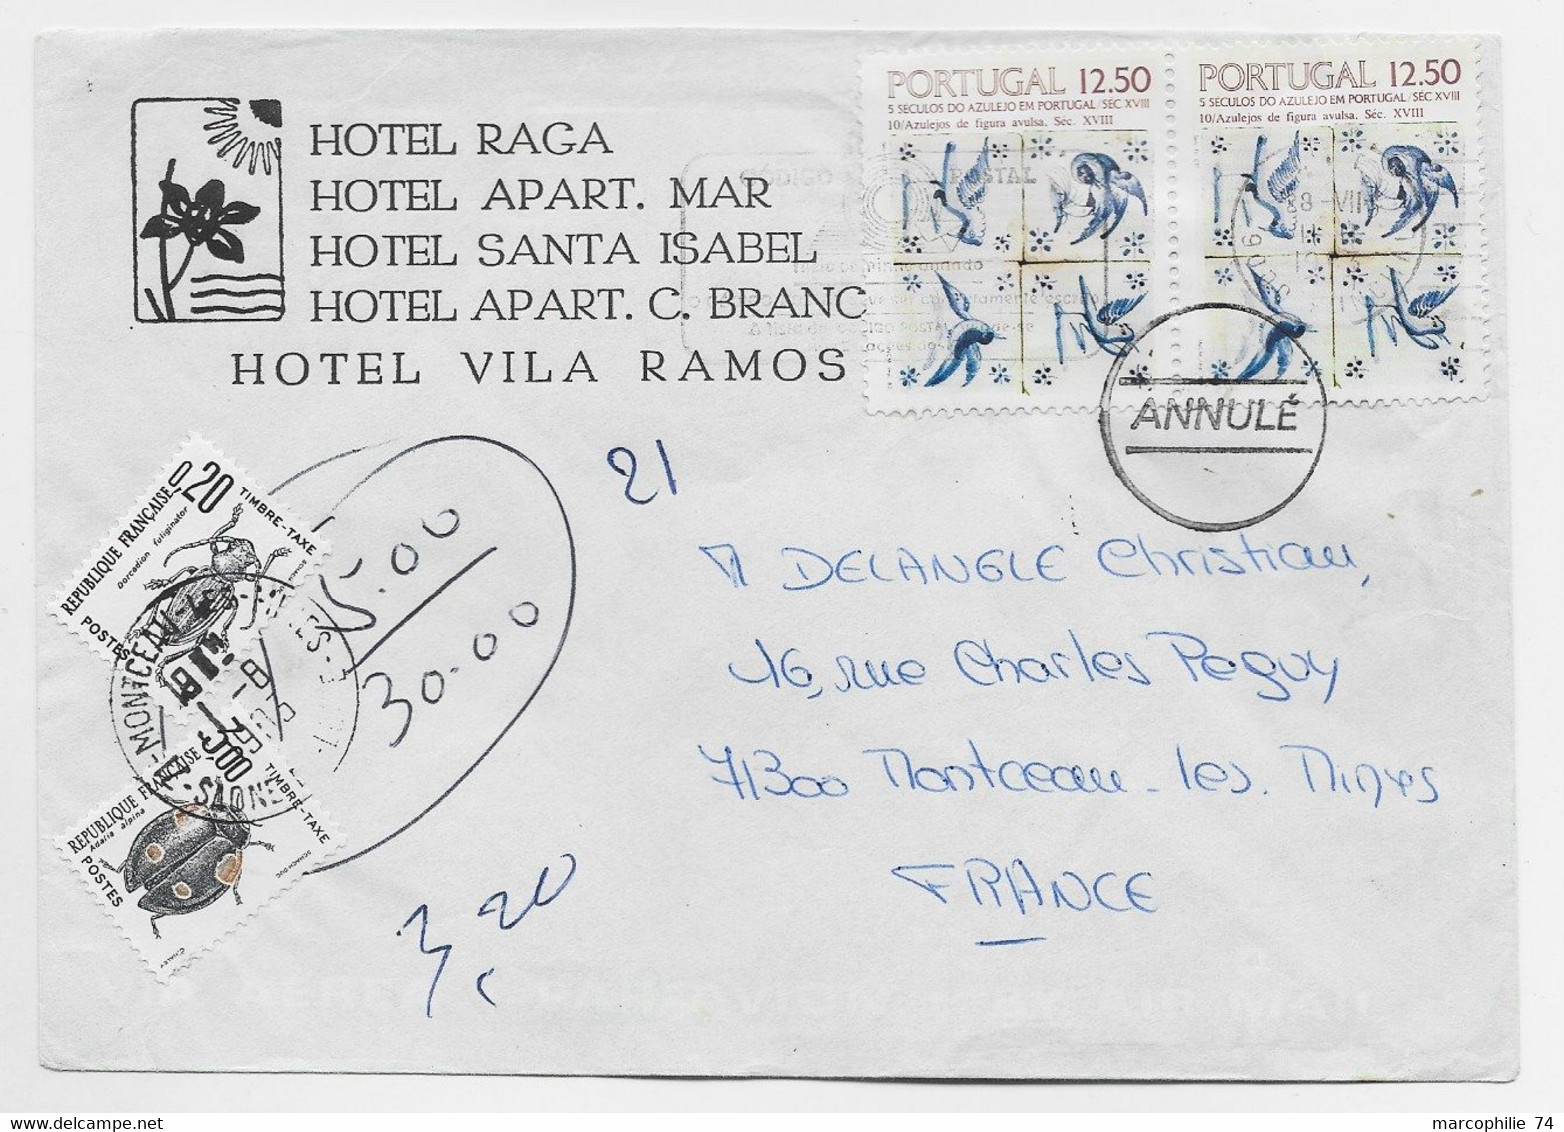 PORTUGAL 12.50 FIGURA C2 LETTRE COVER HOTEL RAGA SANTA ISABEL ANNULE TO FRANCE TAXE INSECTES 3FR+20C+ MONTCEAU 1.6.1983 - Briefe U. Dokumente